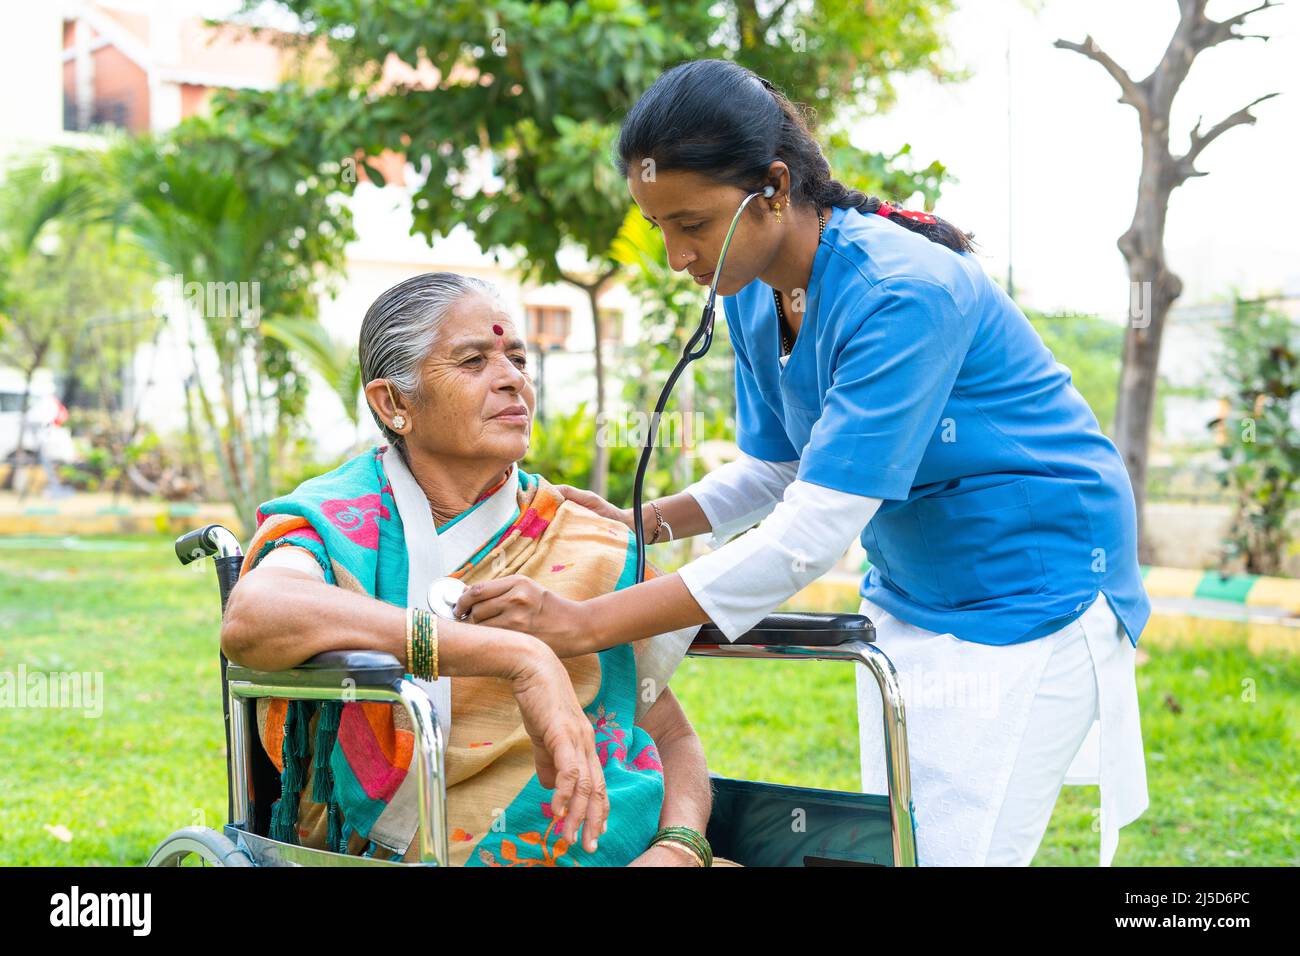 Nurse busy checking or monitoring health of senior woman with disability on wheelchair at hospital park - concept of healthcare, professional Stock Photo